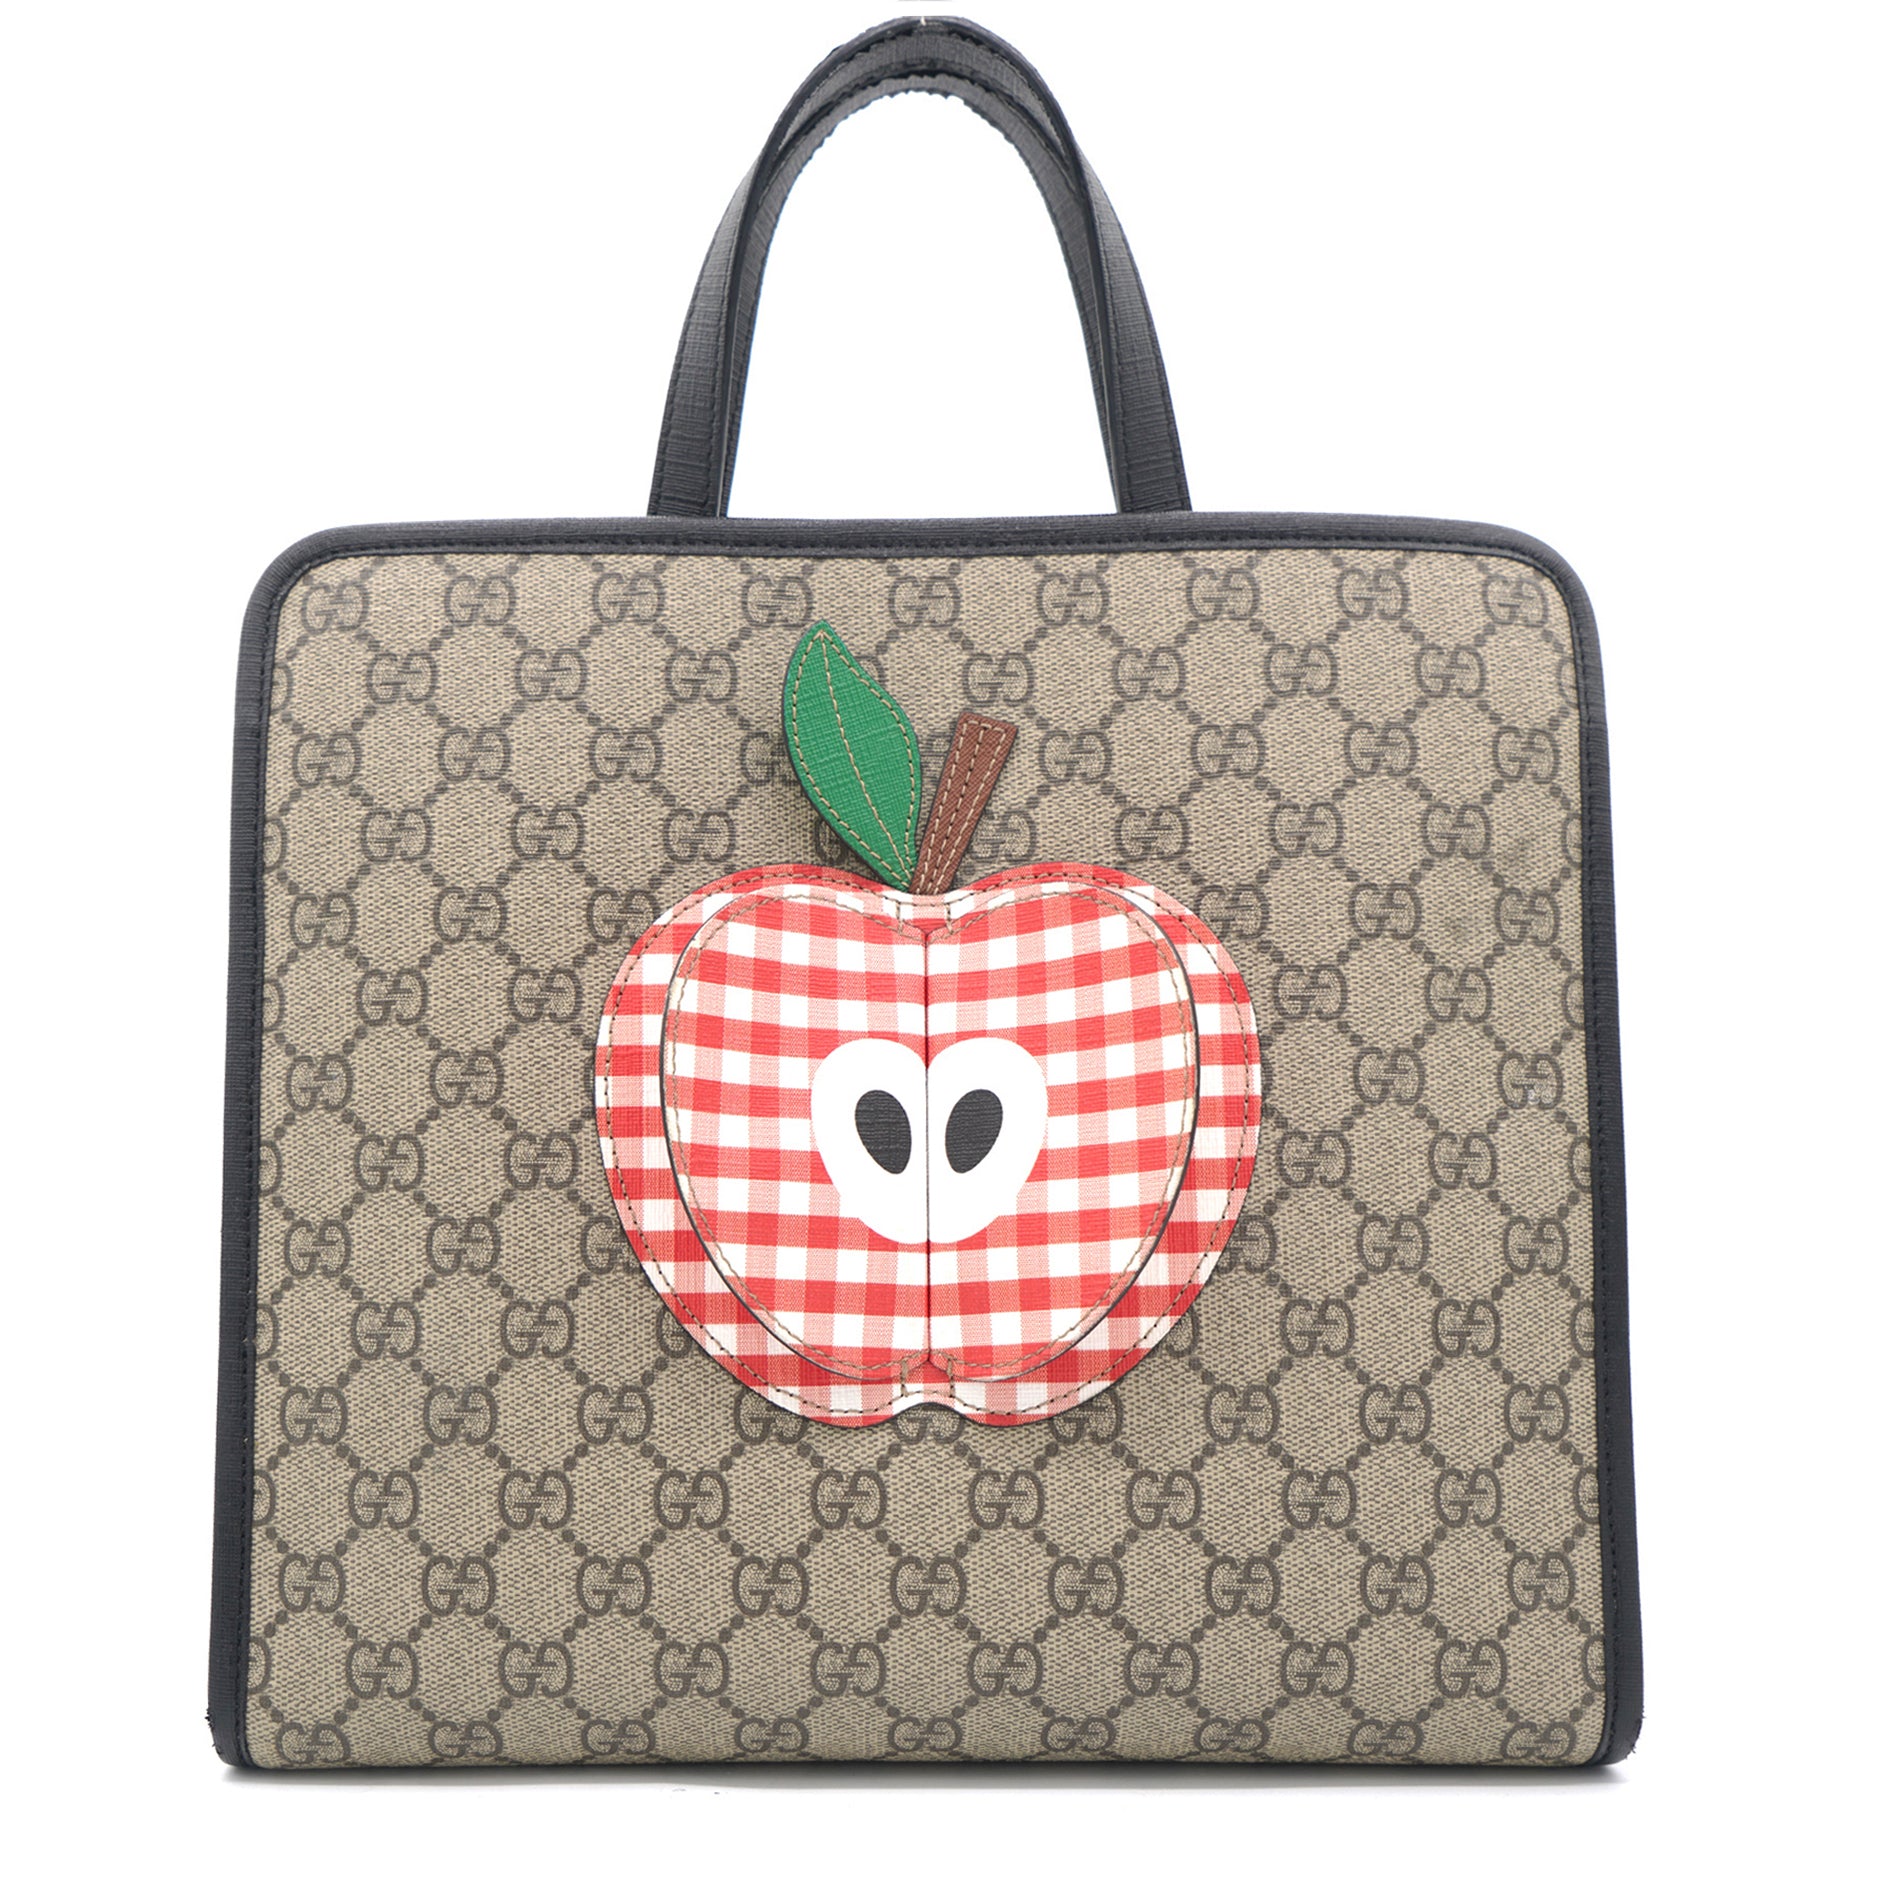 Gucci Children's tote bag with apple – STYLISHTOP